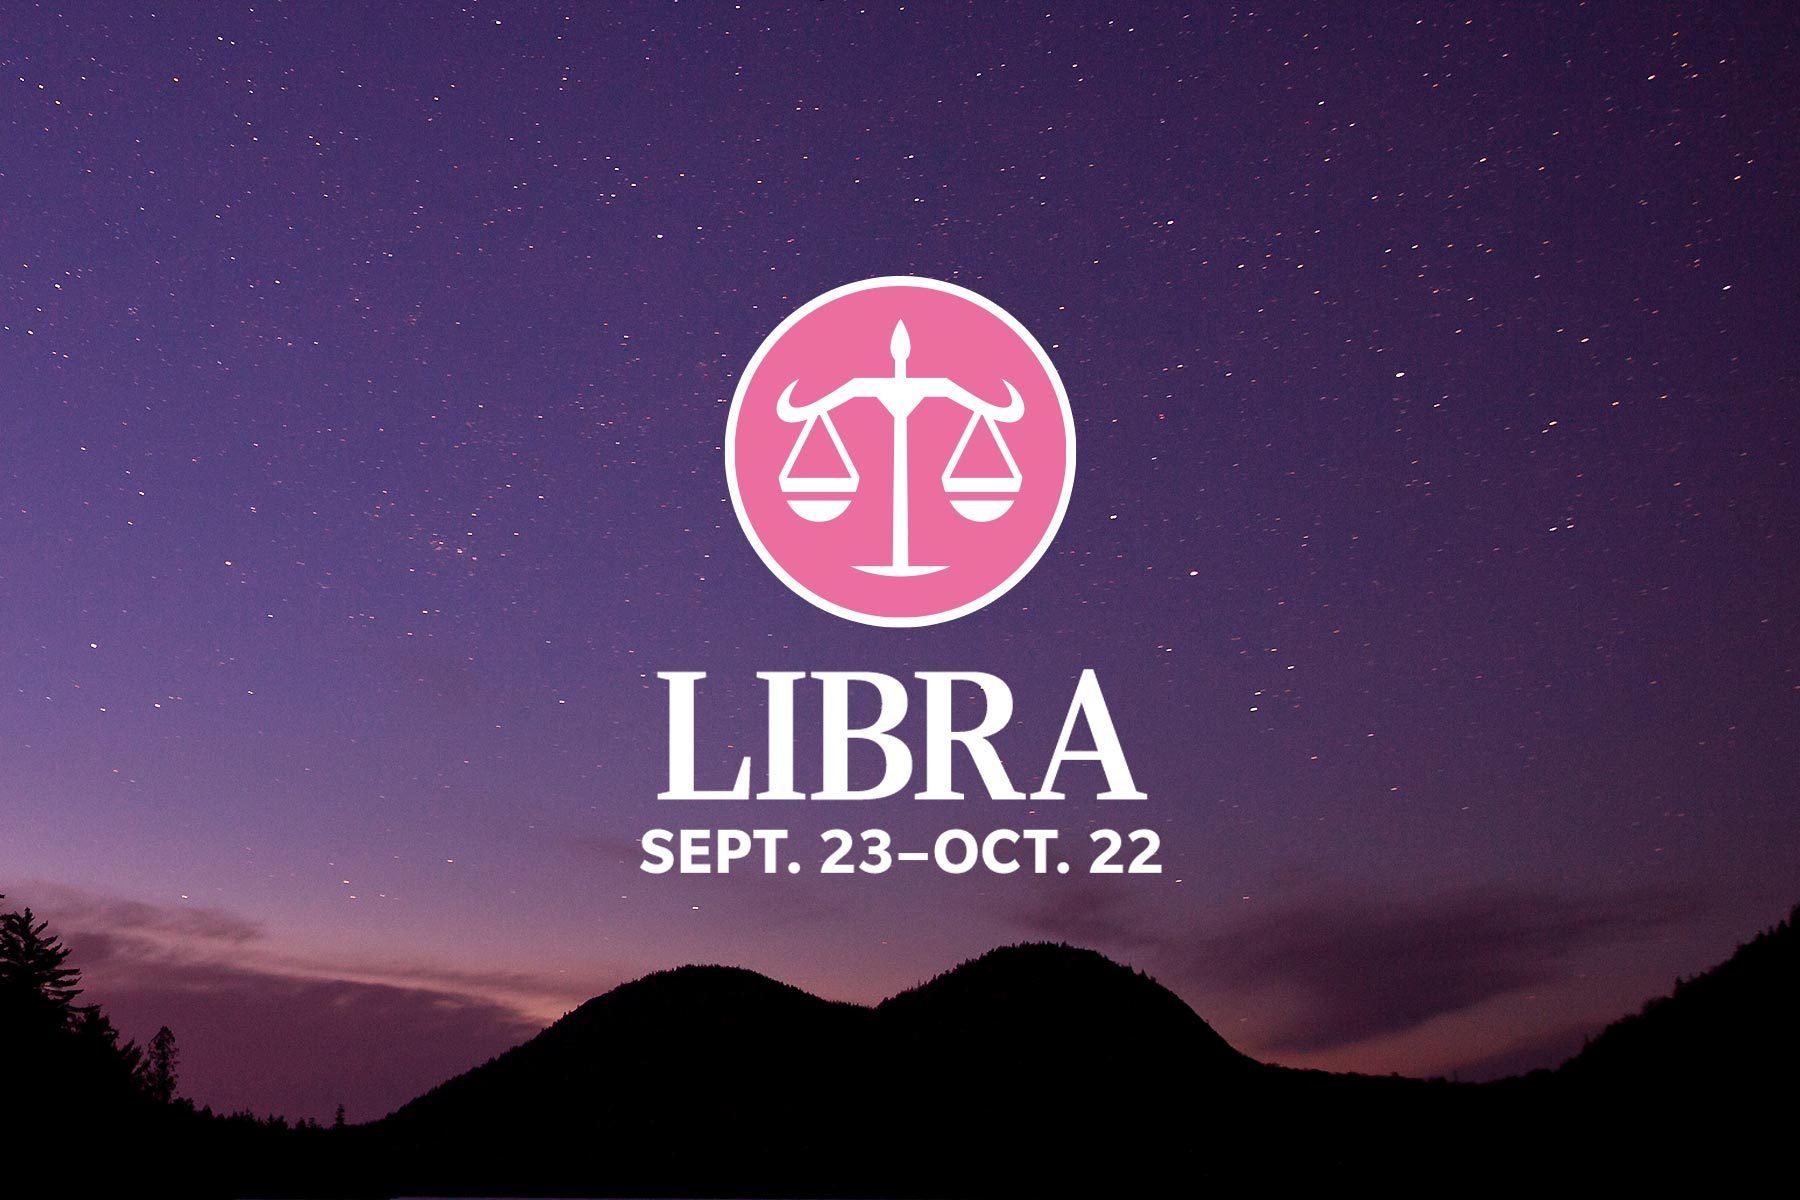 Zodiac Sign Colors libra on galaxy background, purple and pink